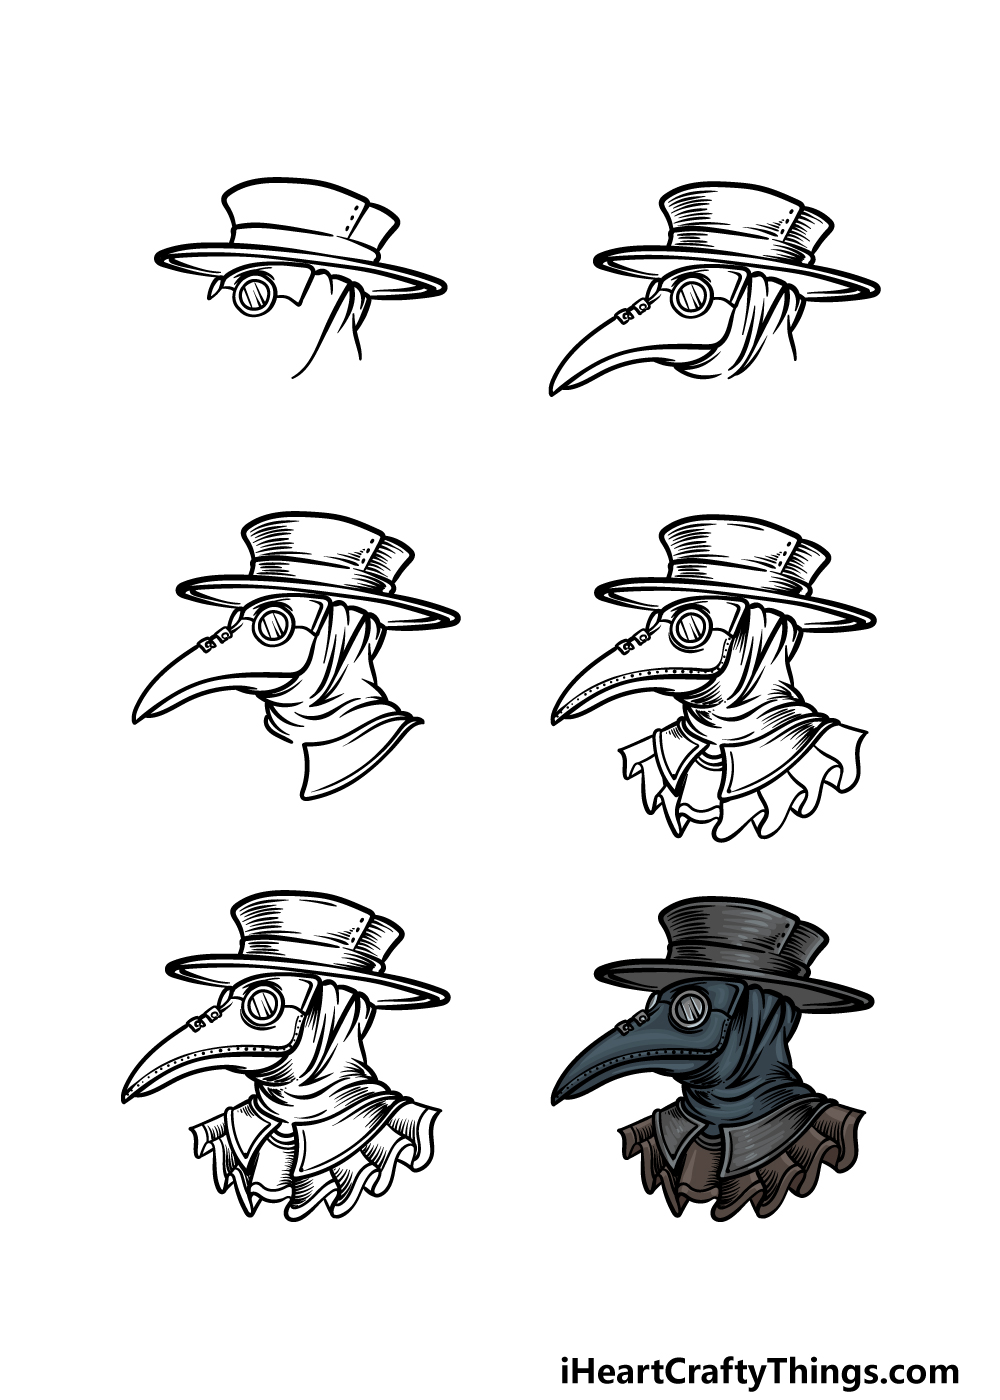 how to draw a plague doctor in 6 steps